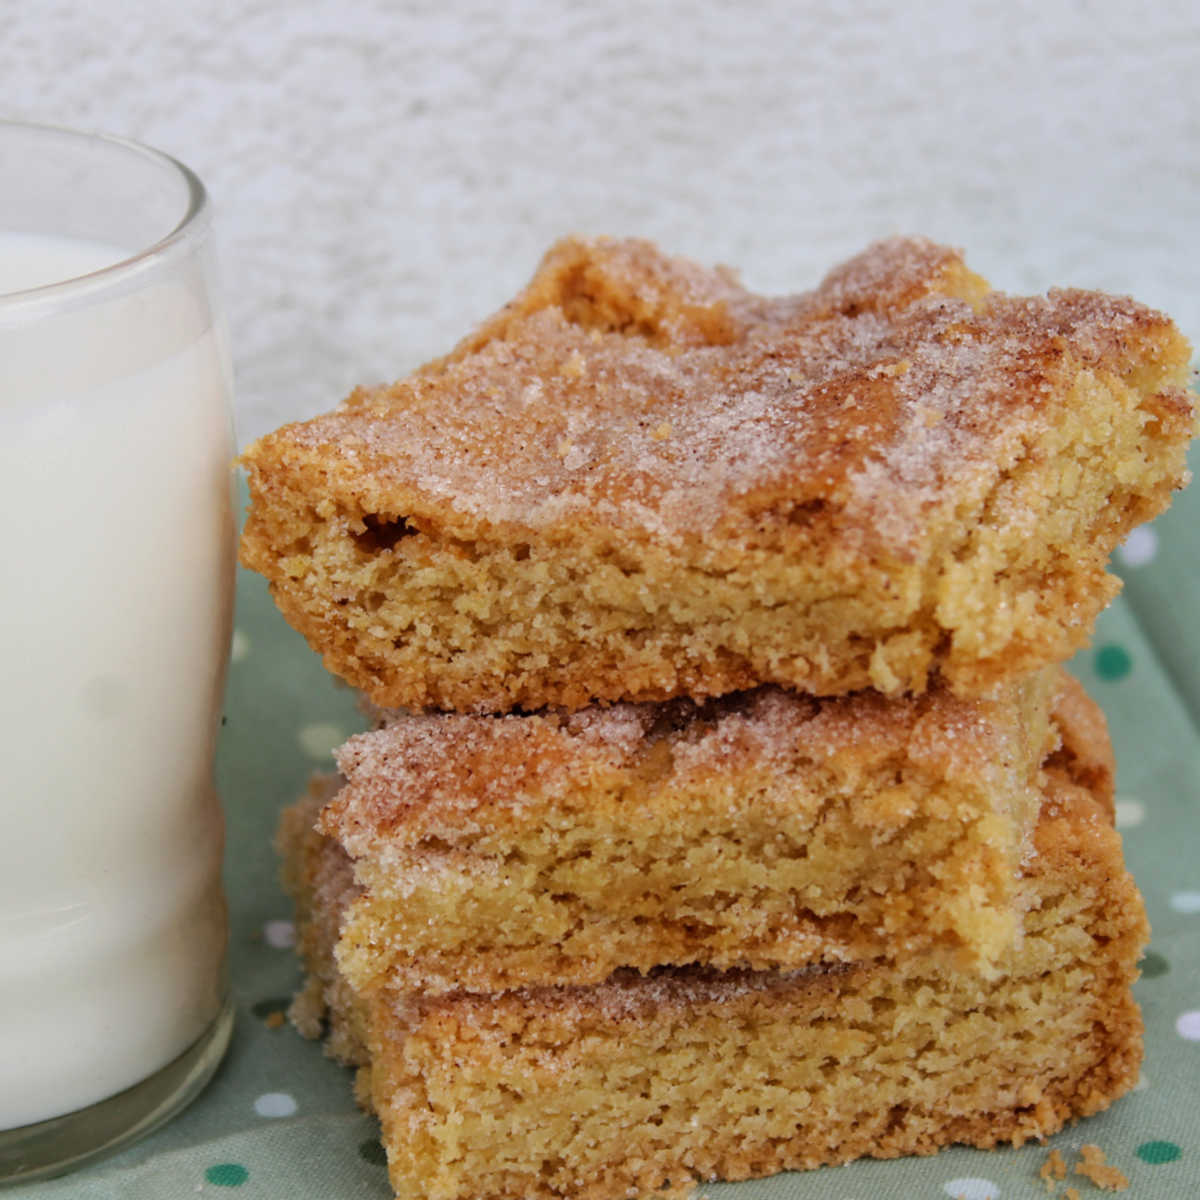 Cinnamon sugar topped snickerdoodle cookie bars next to cup of milk.